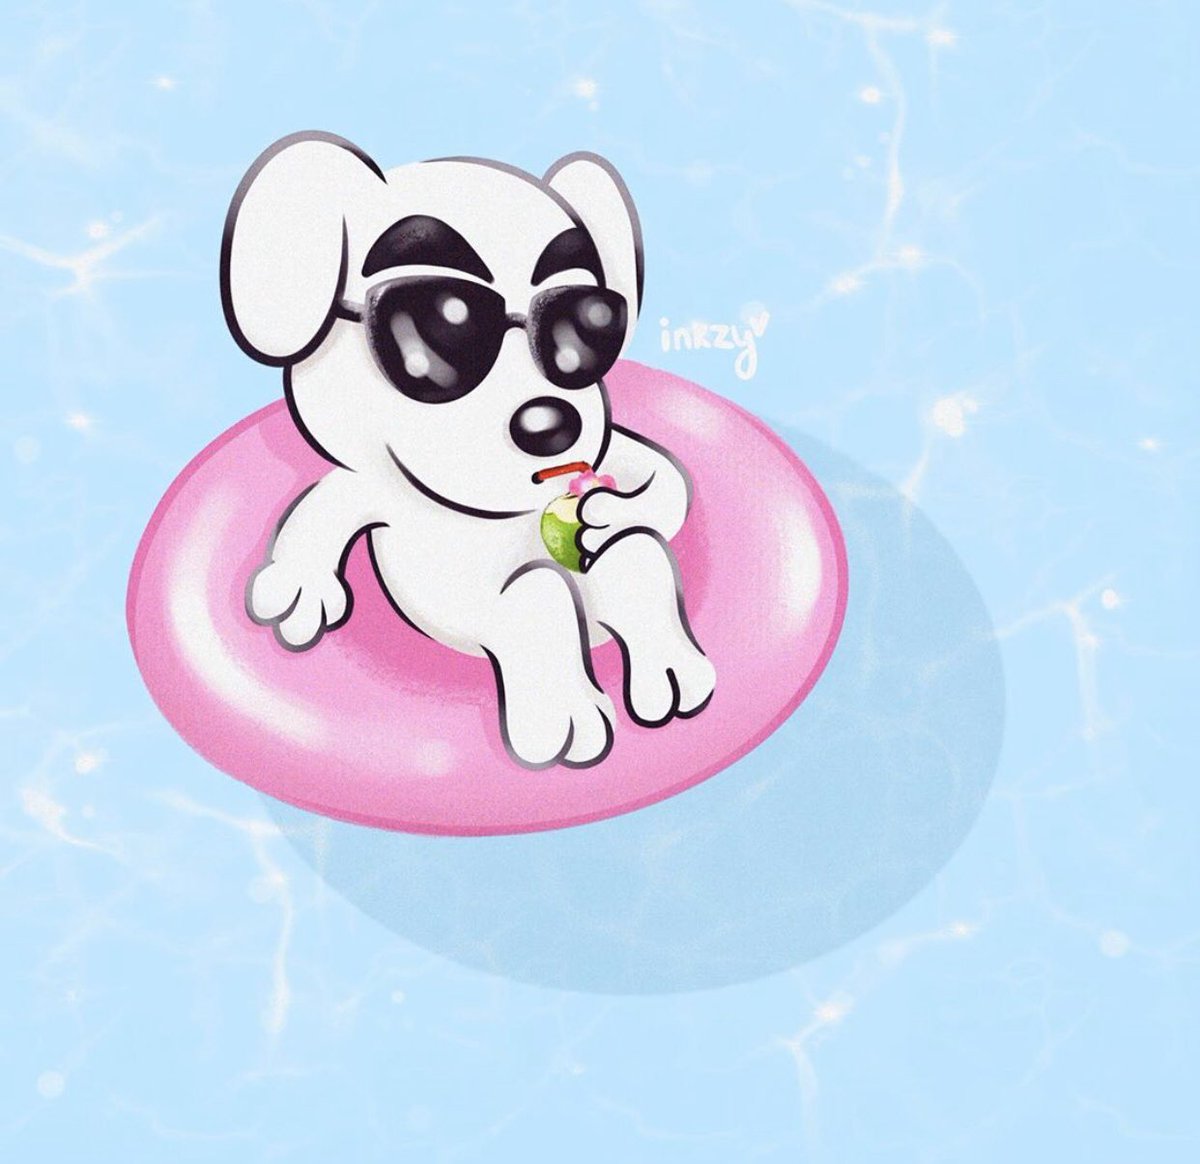 this is what i imagine KK slider does after his concerts... 🍹🏝
•
#kkslider #animalcrossingnewhorizons #animalcrossing #relax #ocean #poolfloat #drink #illustration